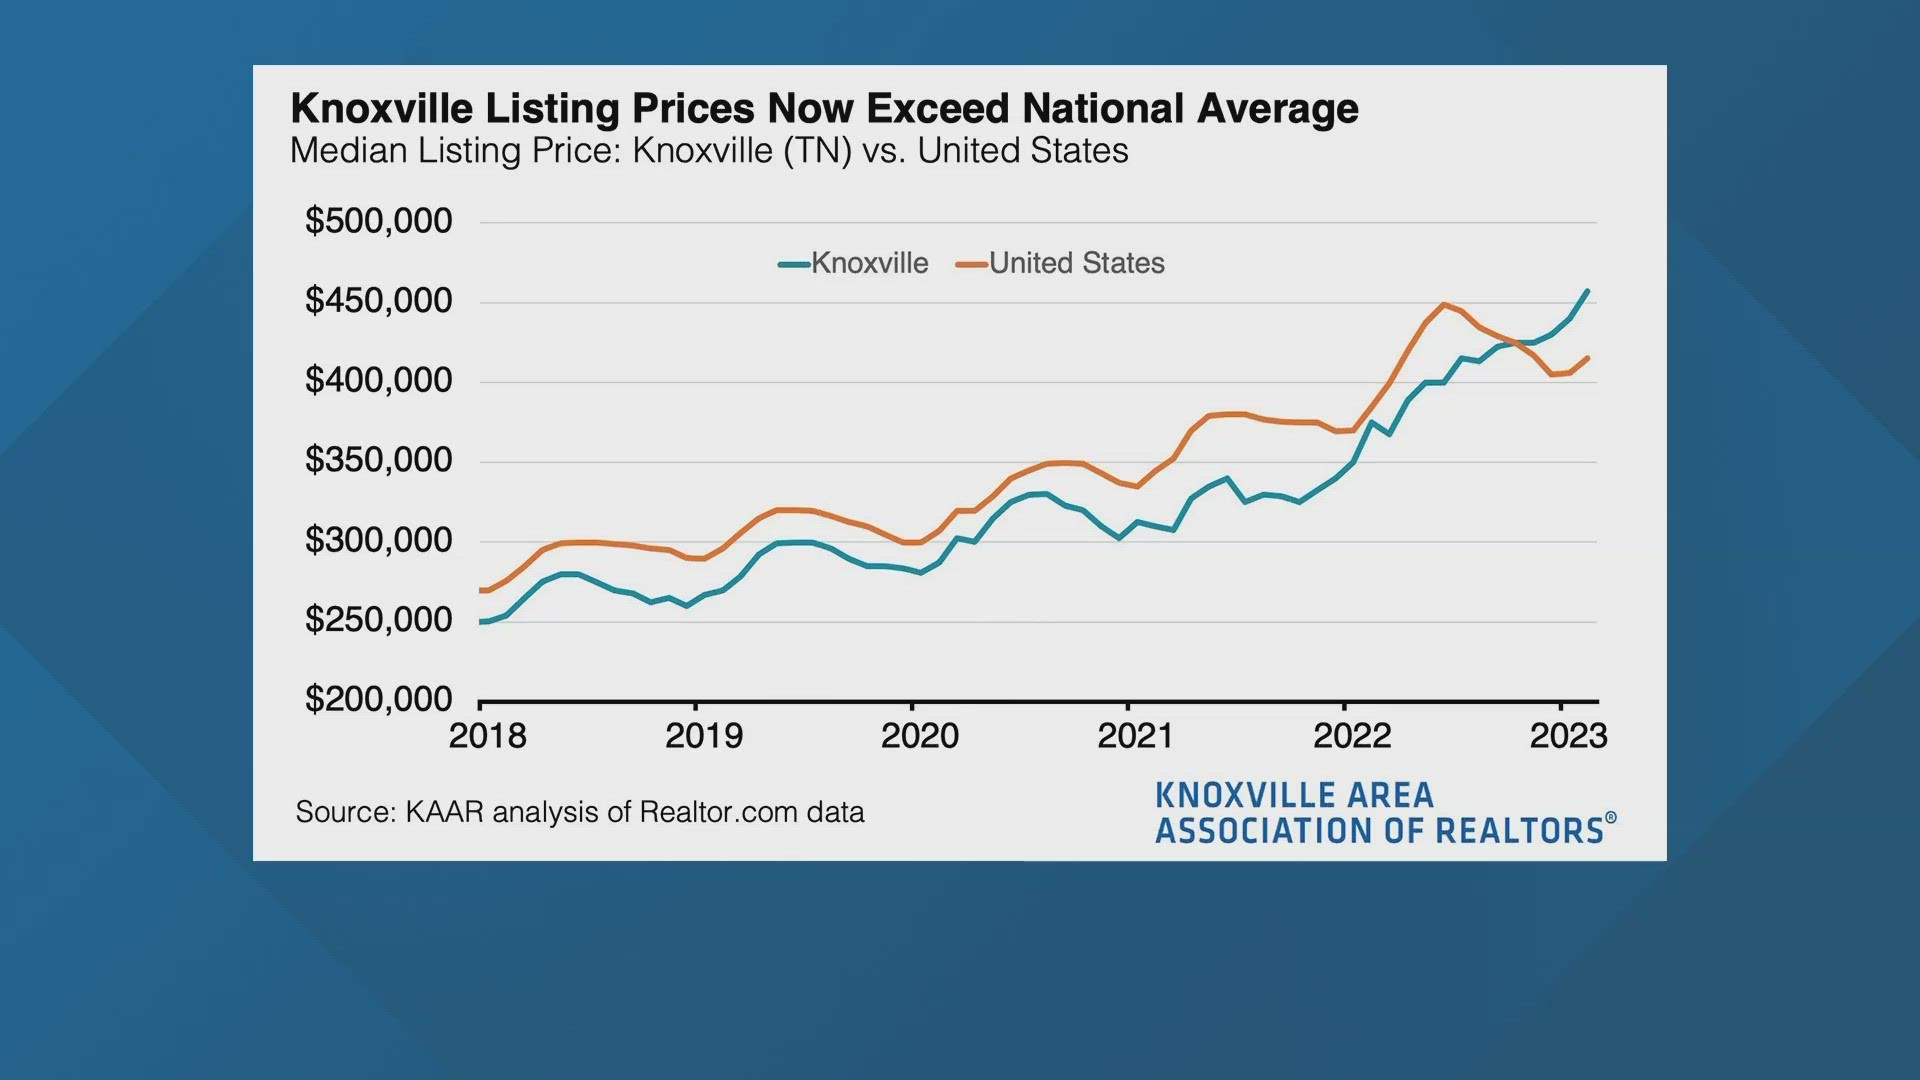 Towards the end of 2022, the national median price of homes dropped while the median price of a home in Knoxville grew.